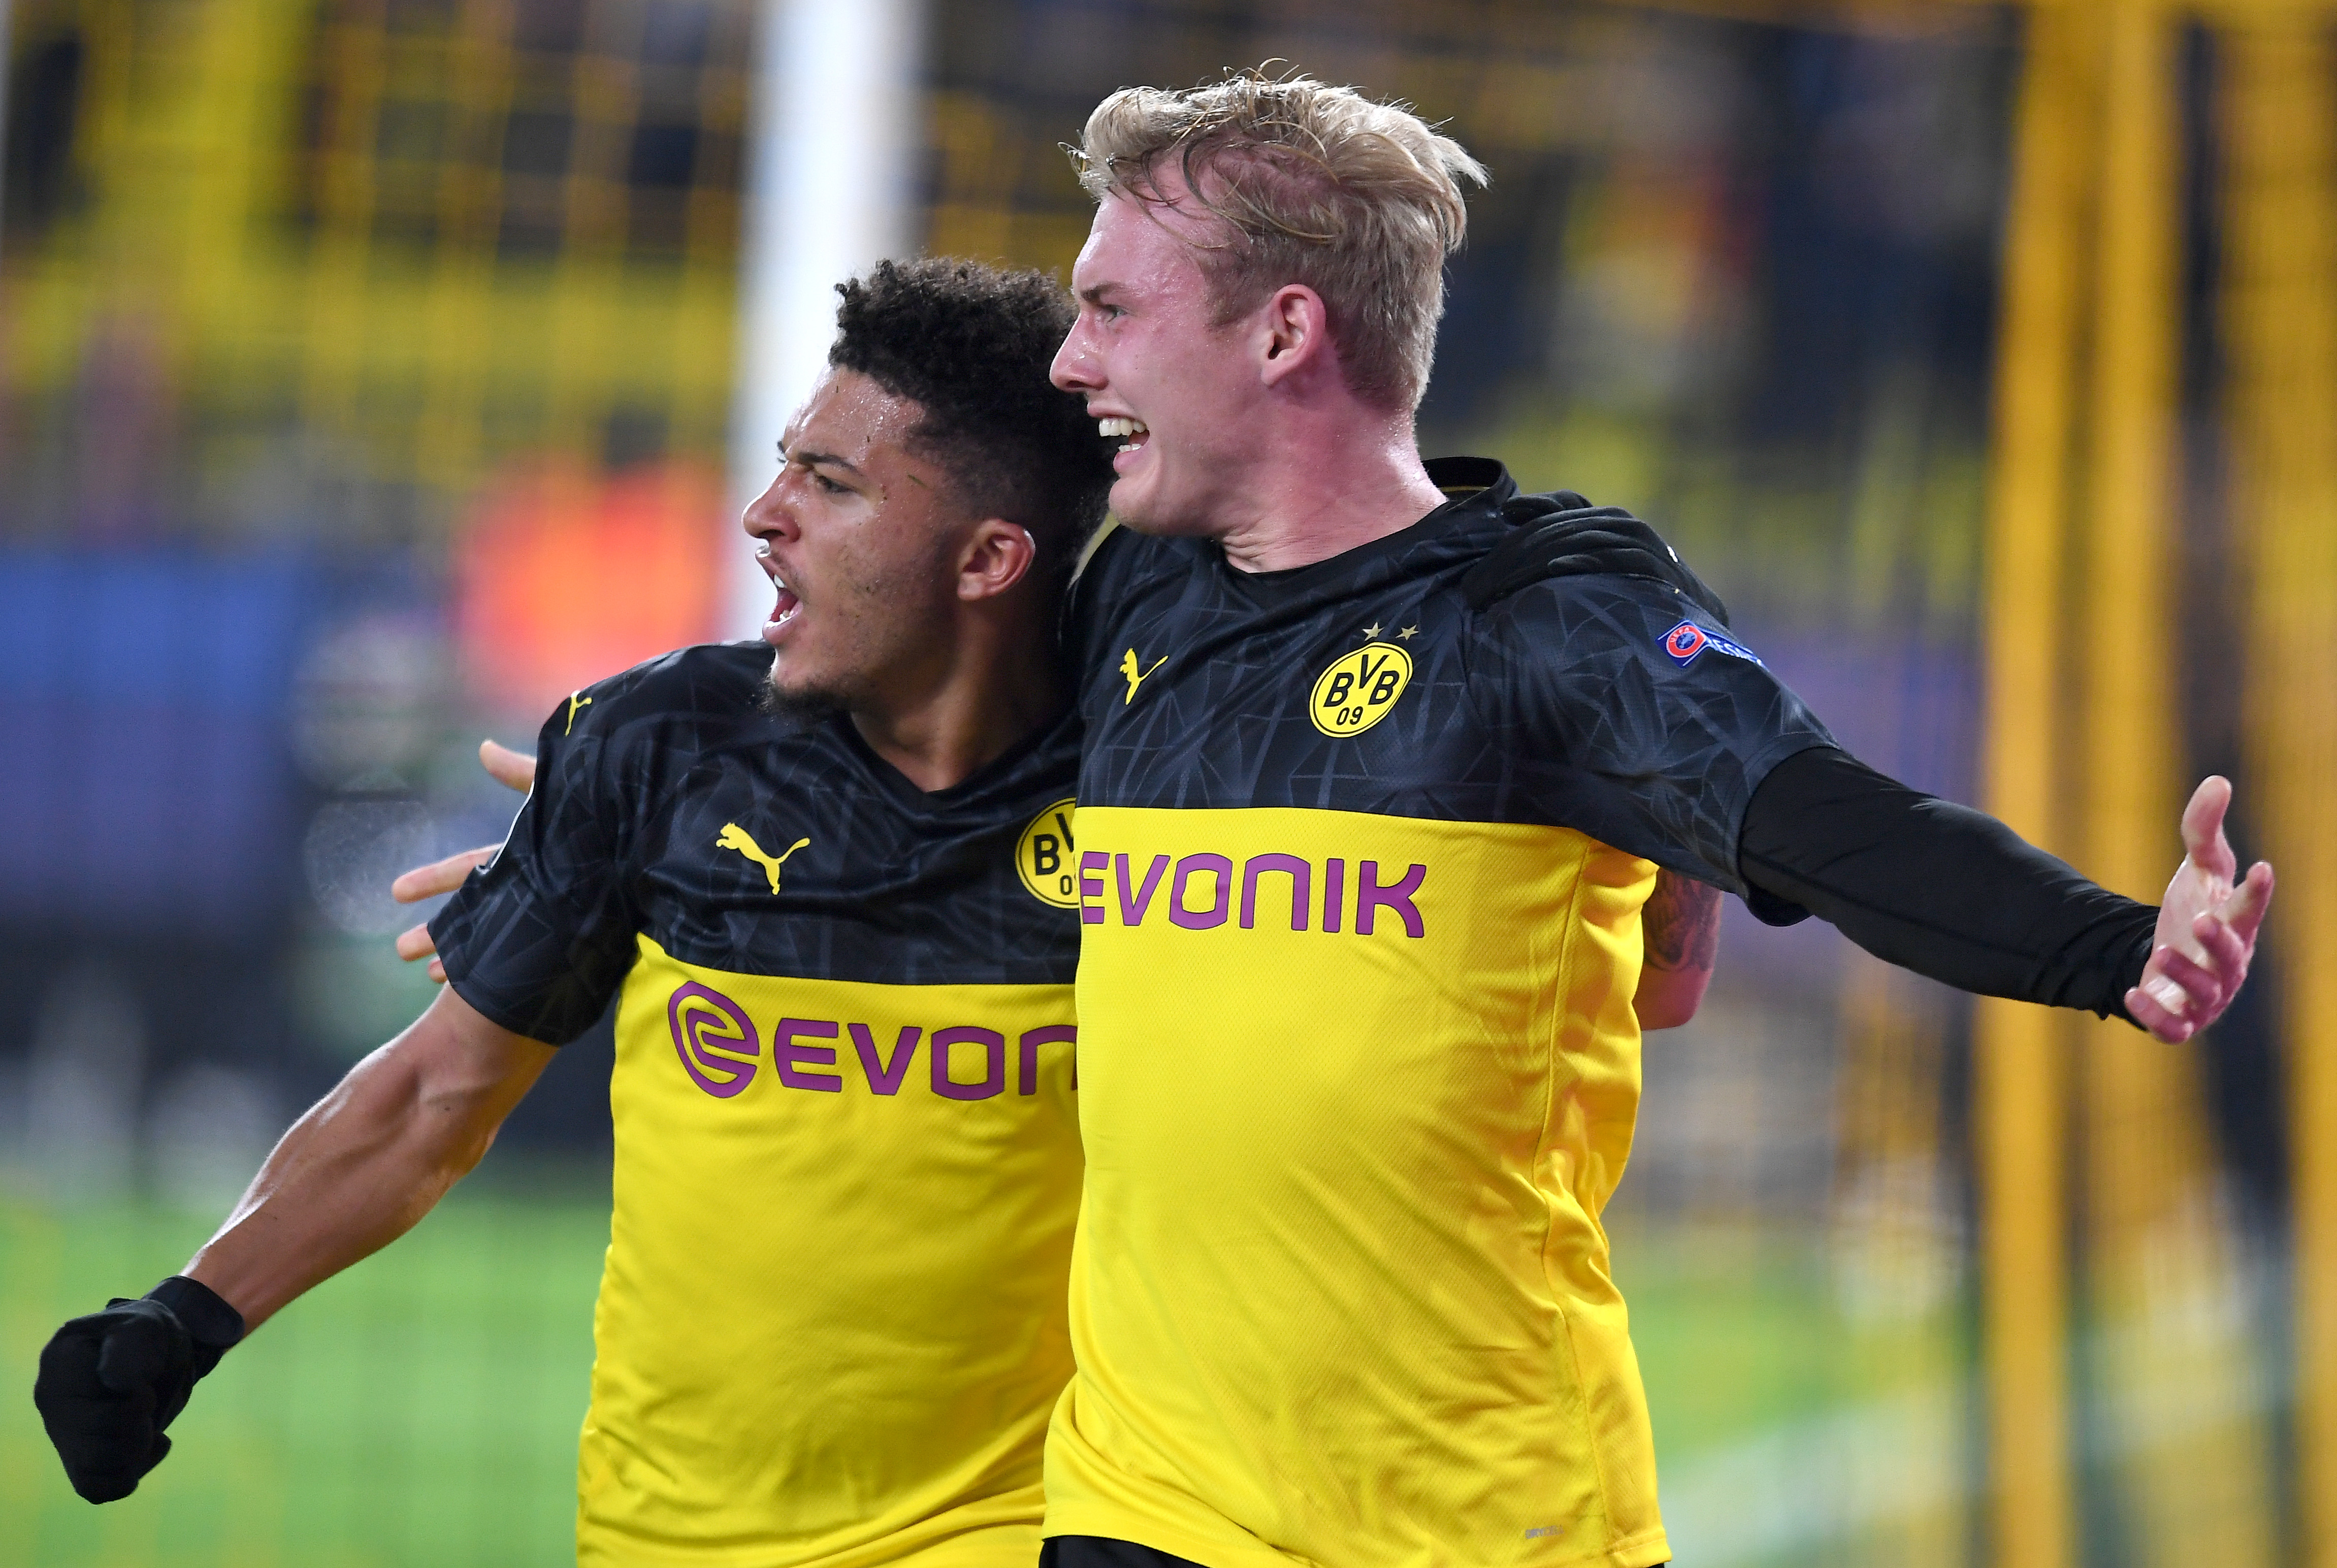 DORTMUND, GERMANY - NOVEMBER 05: Julian Brandt of Borussia Dortmund celebrates after scoring his team's second goal with teammate Jadon Sancho during the UEFA Champions League group F match between Borussia Dortmund and Inter at Signal Iduna Park on November 05, 2019 in Dortmund, Germany. (Photo by Jörg Schüler/Getty Images)